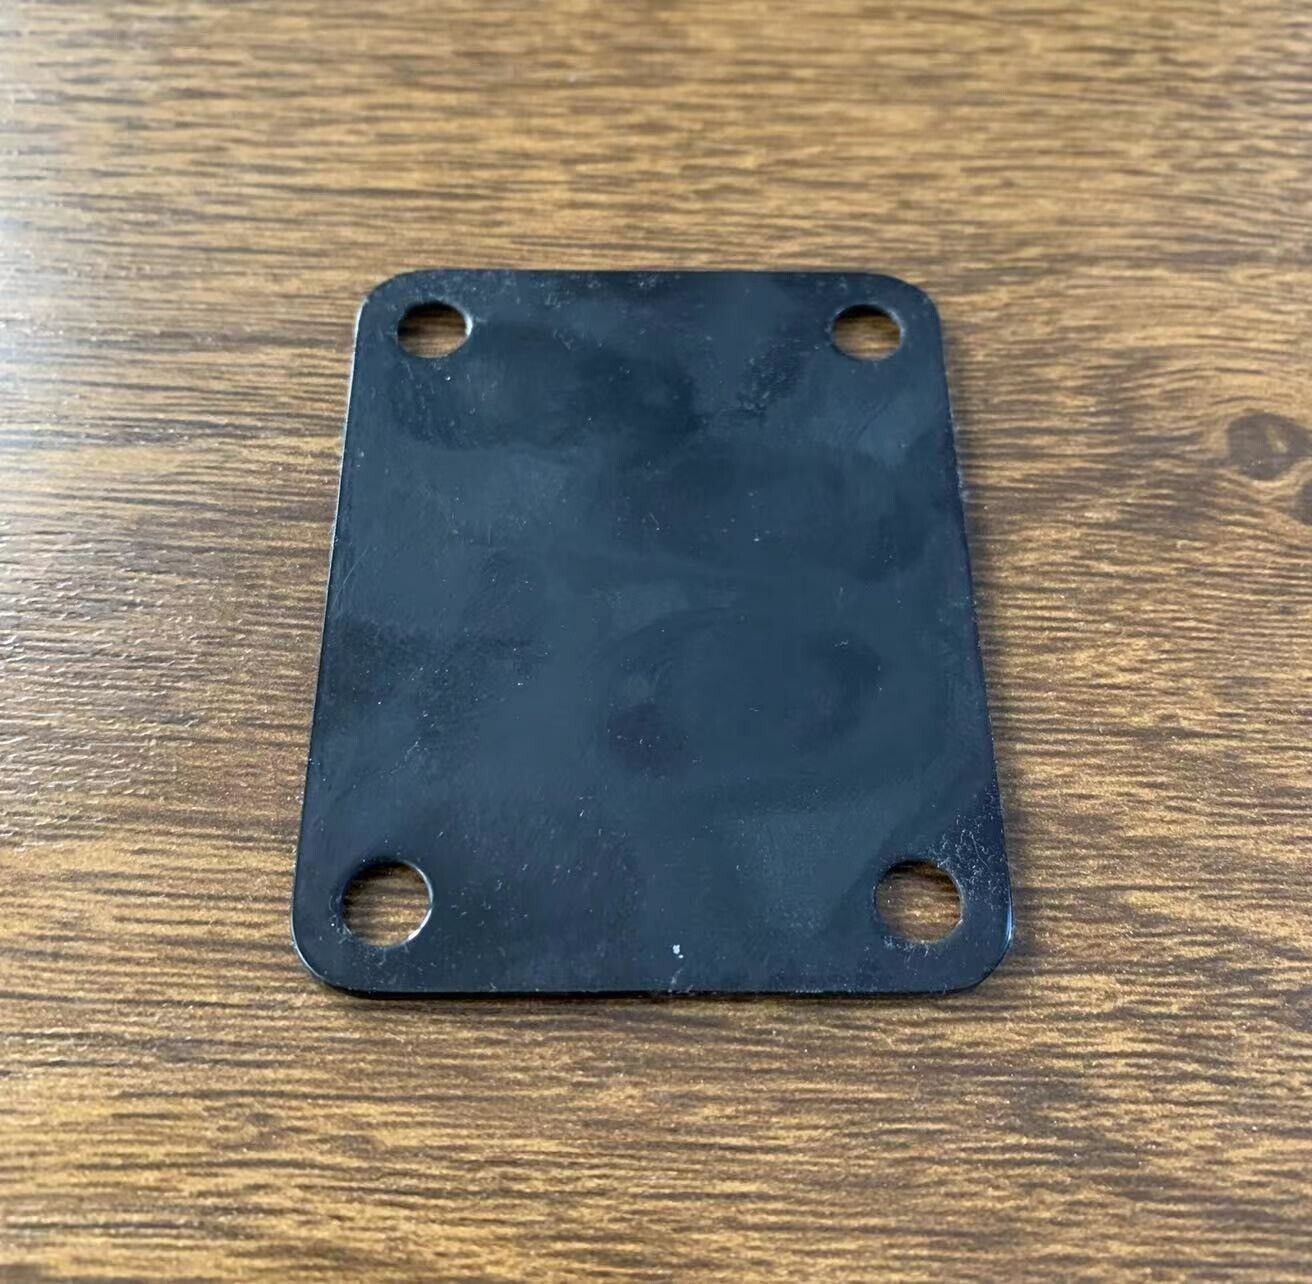 Black Ibanez Guitar and Bass Neck Plate with Mounting Screws